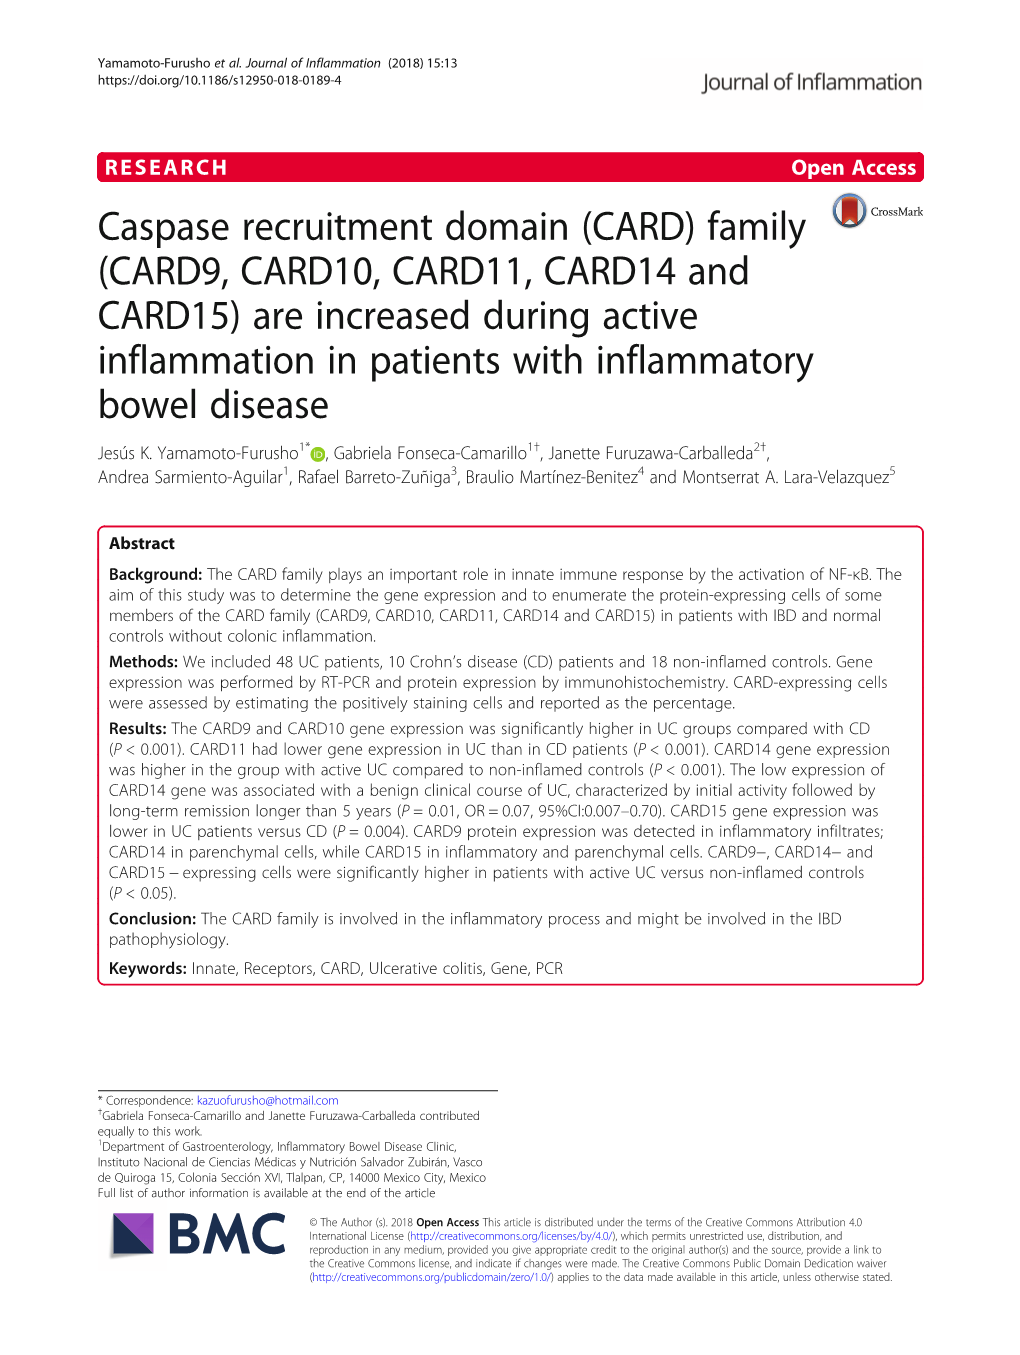 Caspase Recruitment Domain (CARD) Family (CARD9, CARD10, CARD11, CARD14 and CARD15) Are Increased During Active Inflammation In